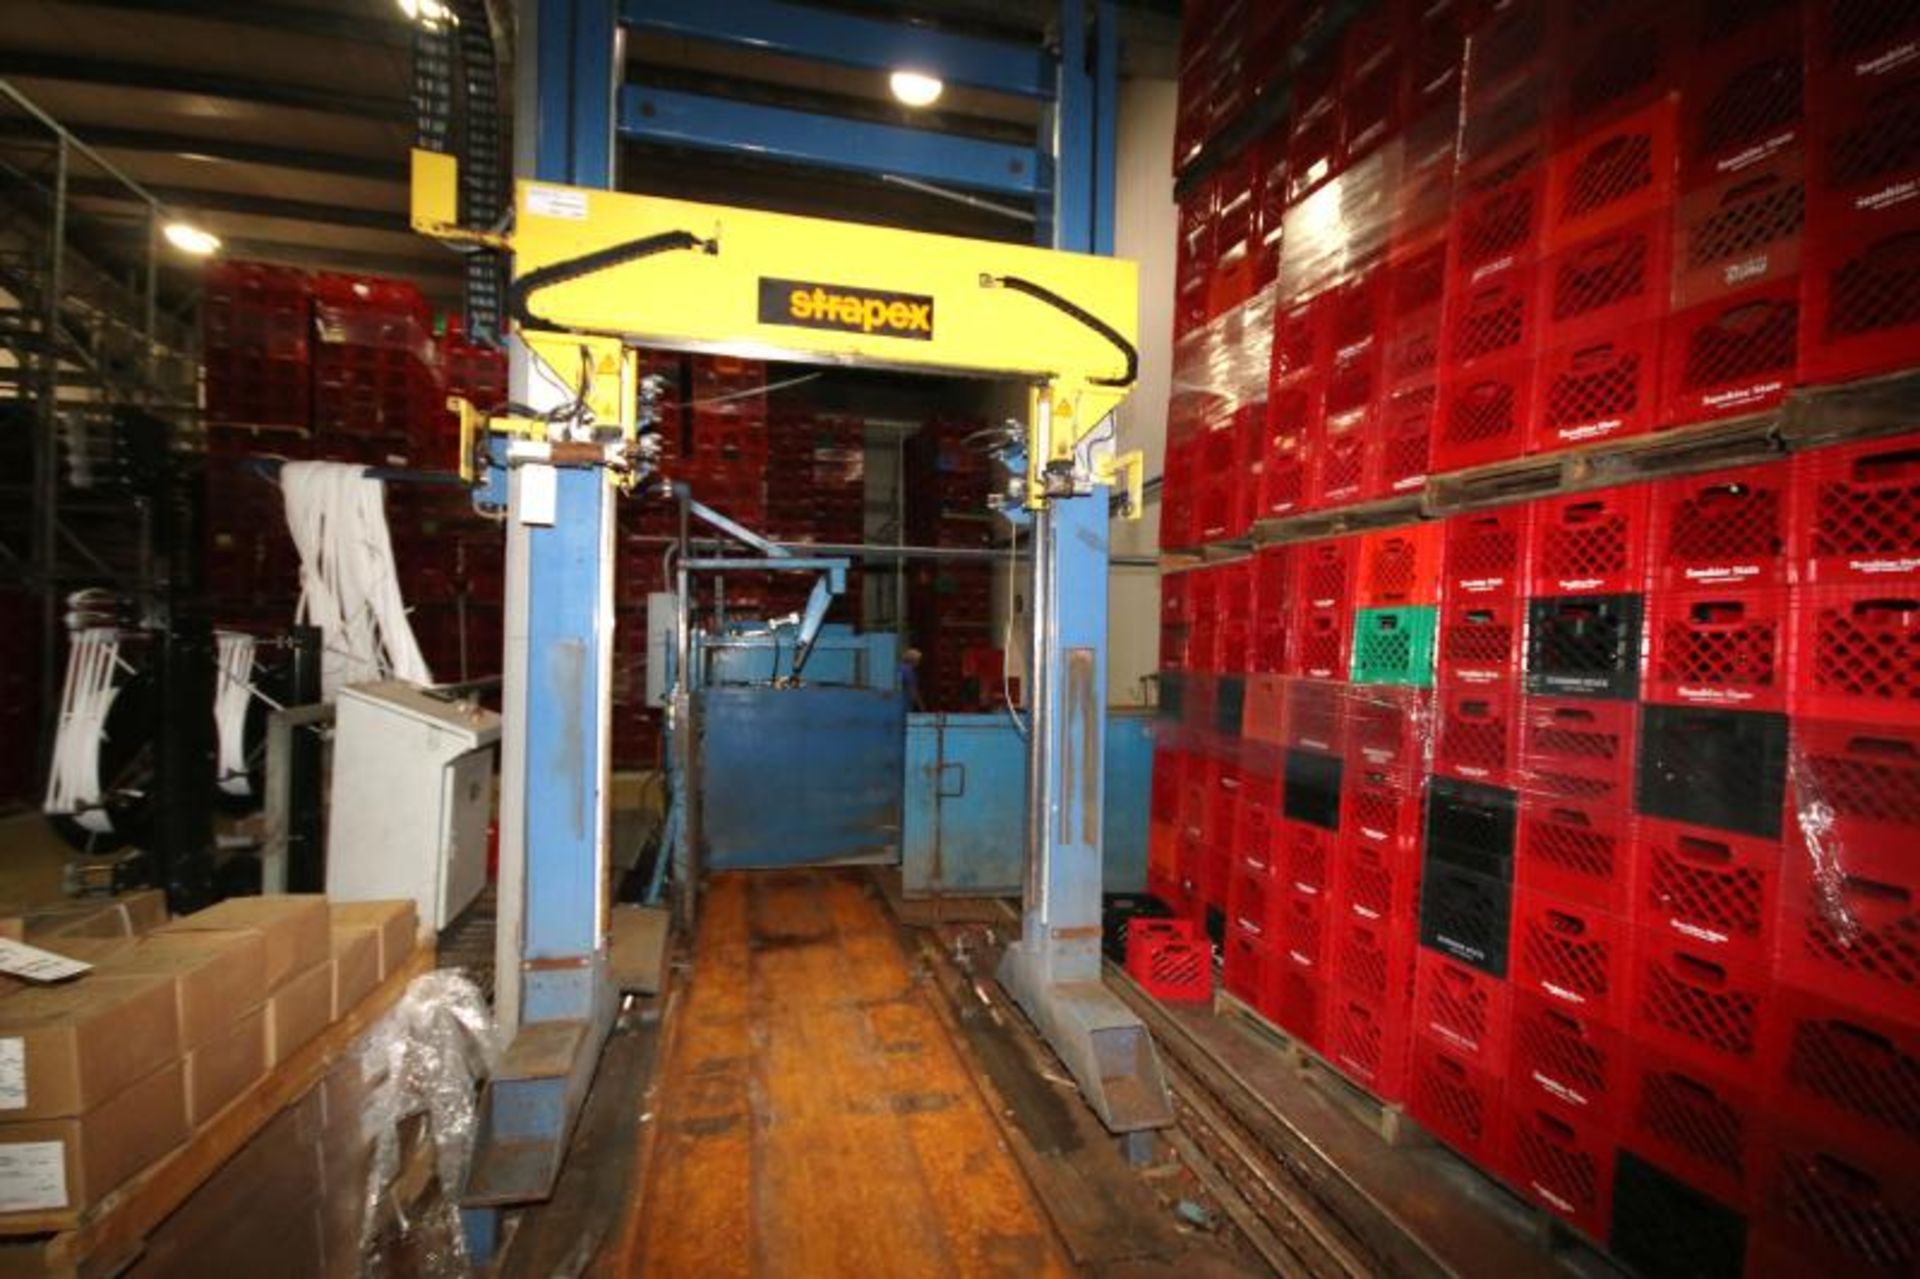 2006 Strapex/Endra Heesch-Holland Aprox. 11 ft. 9" H Pallet Strapper, Machine #H2M, S/N 2657 with